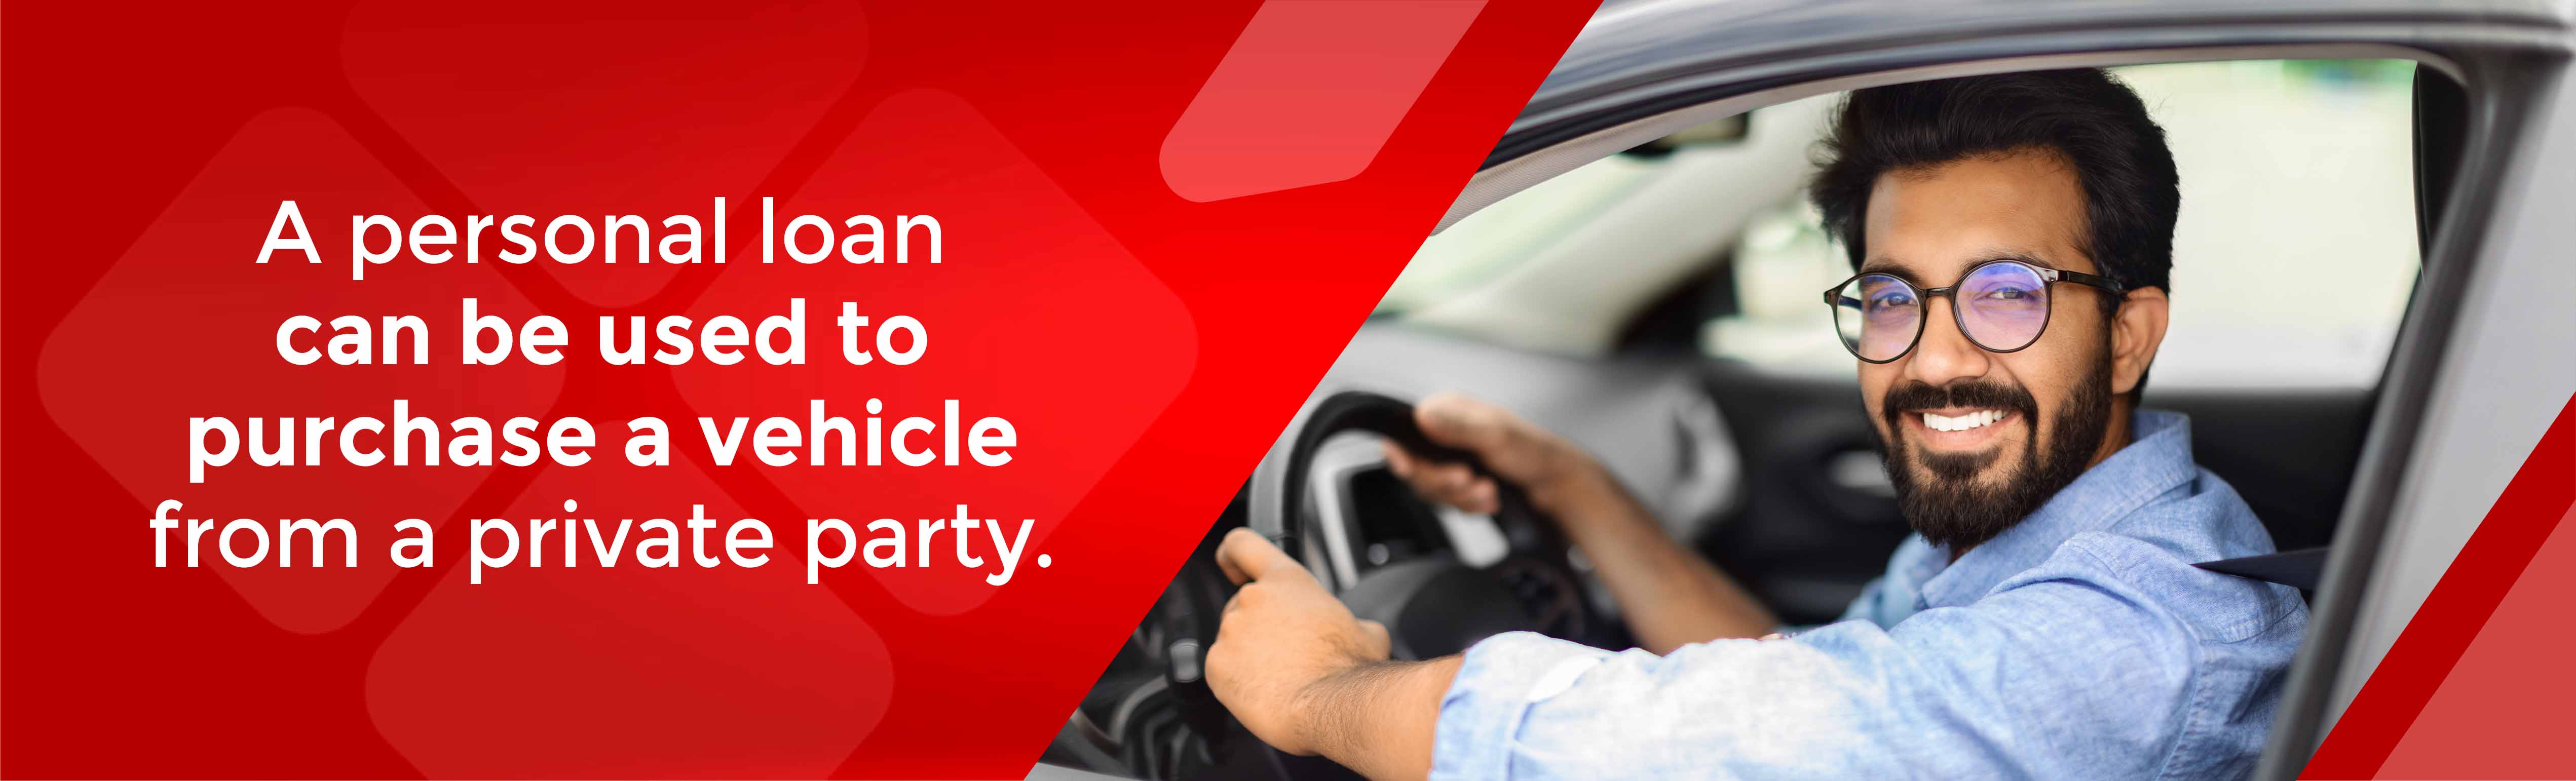 A personal loan can be used to purchase a vehicle from a private party. 